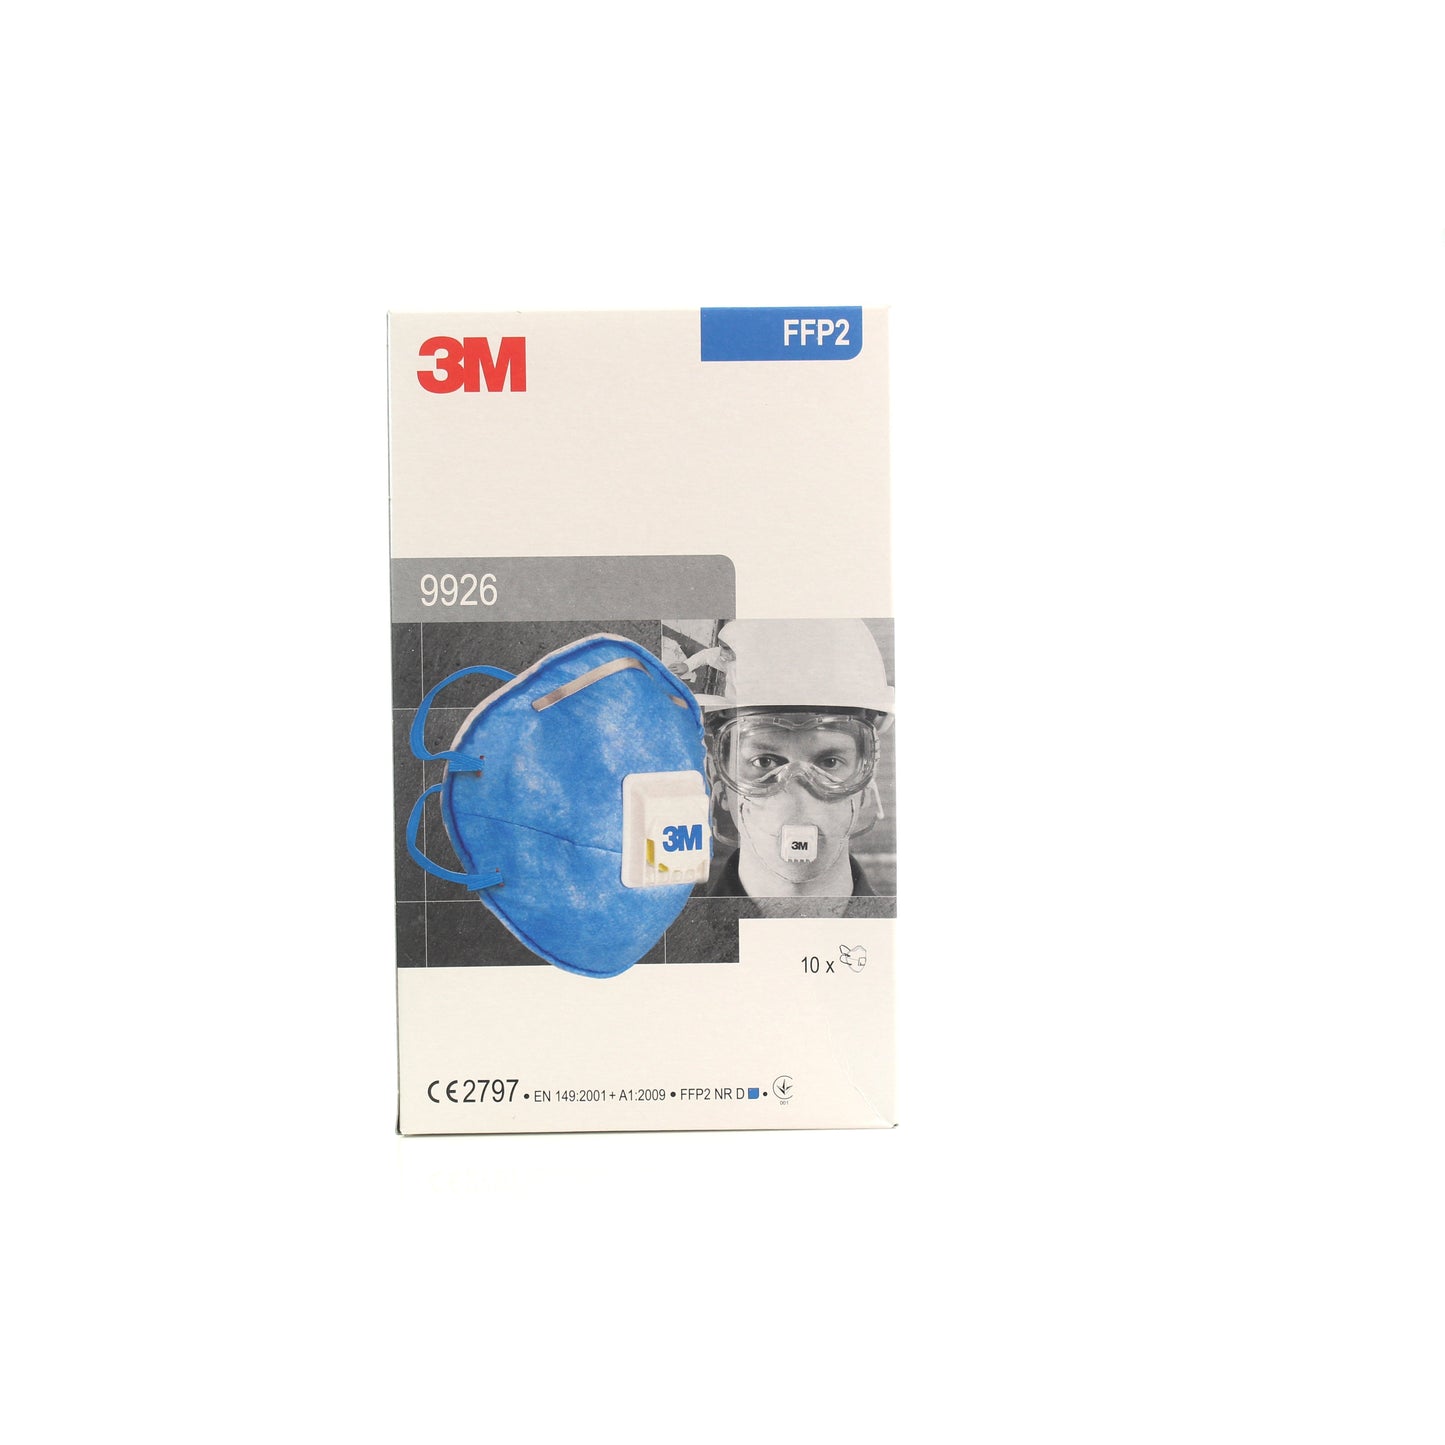 3M™ Particulate Respirator Face Mask FFP2 Valved - 9926 - Box of 10